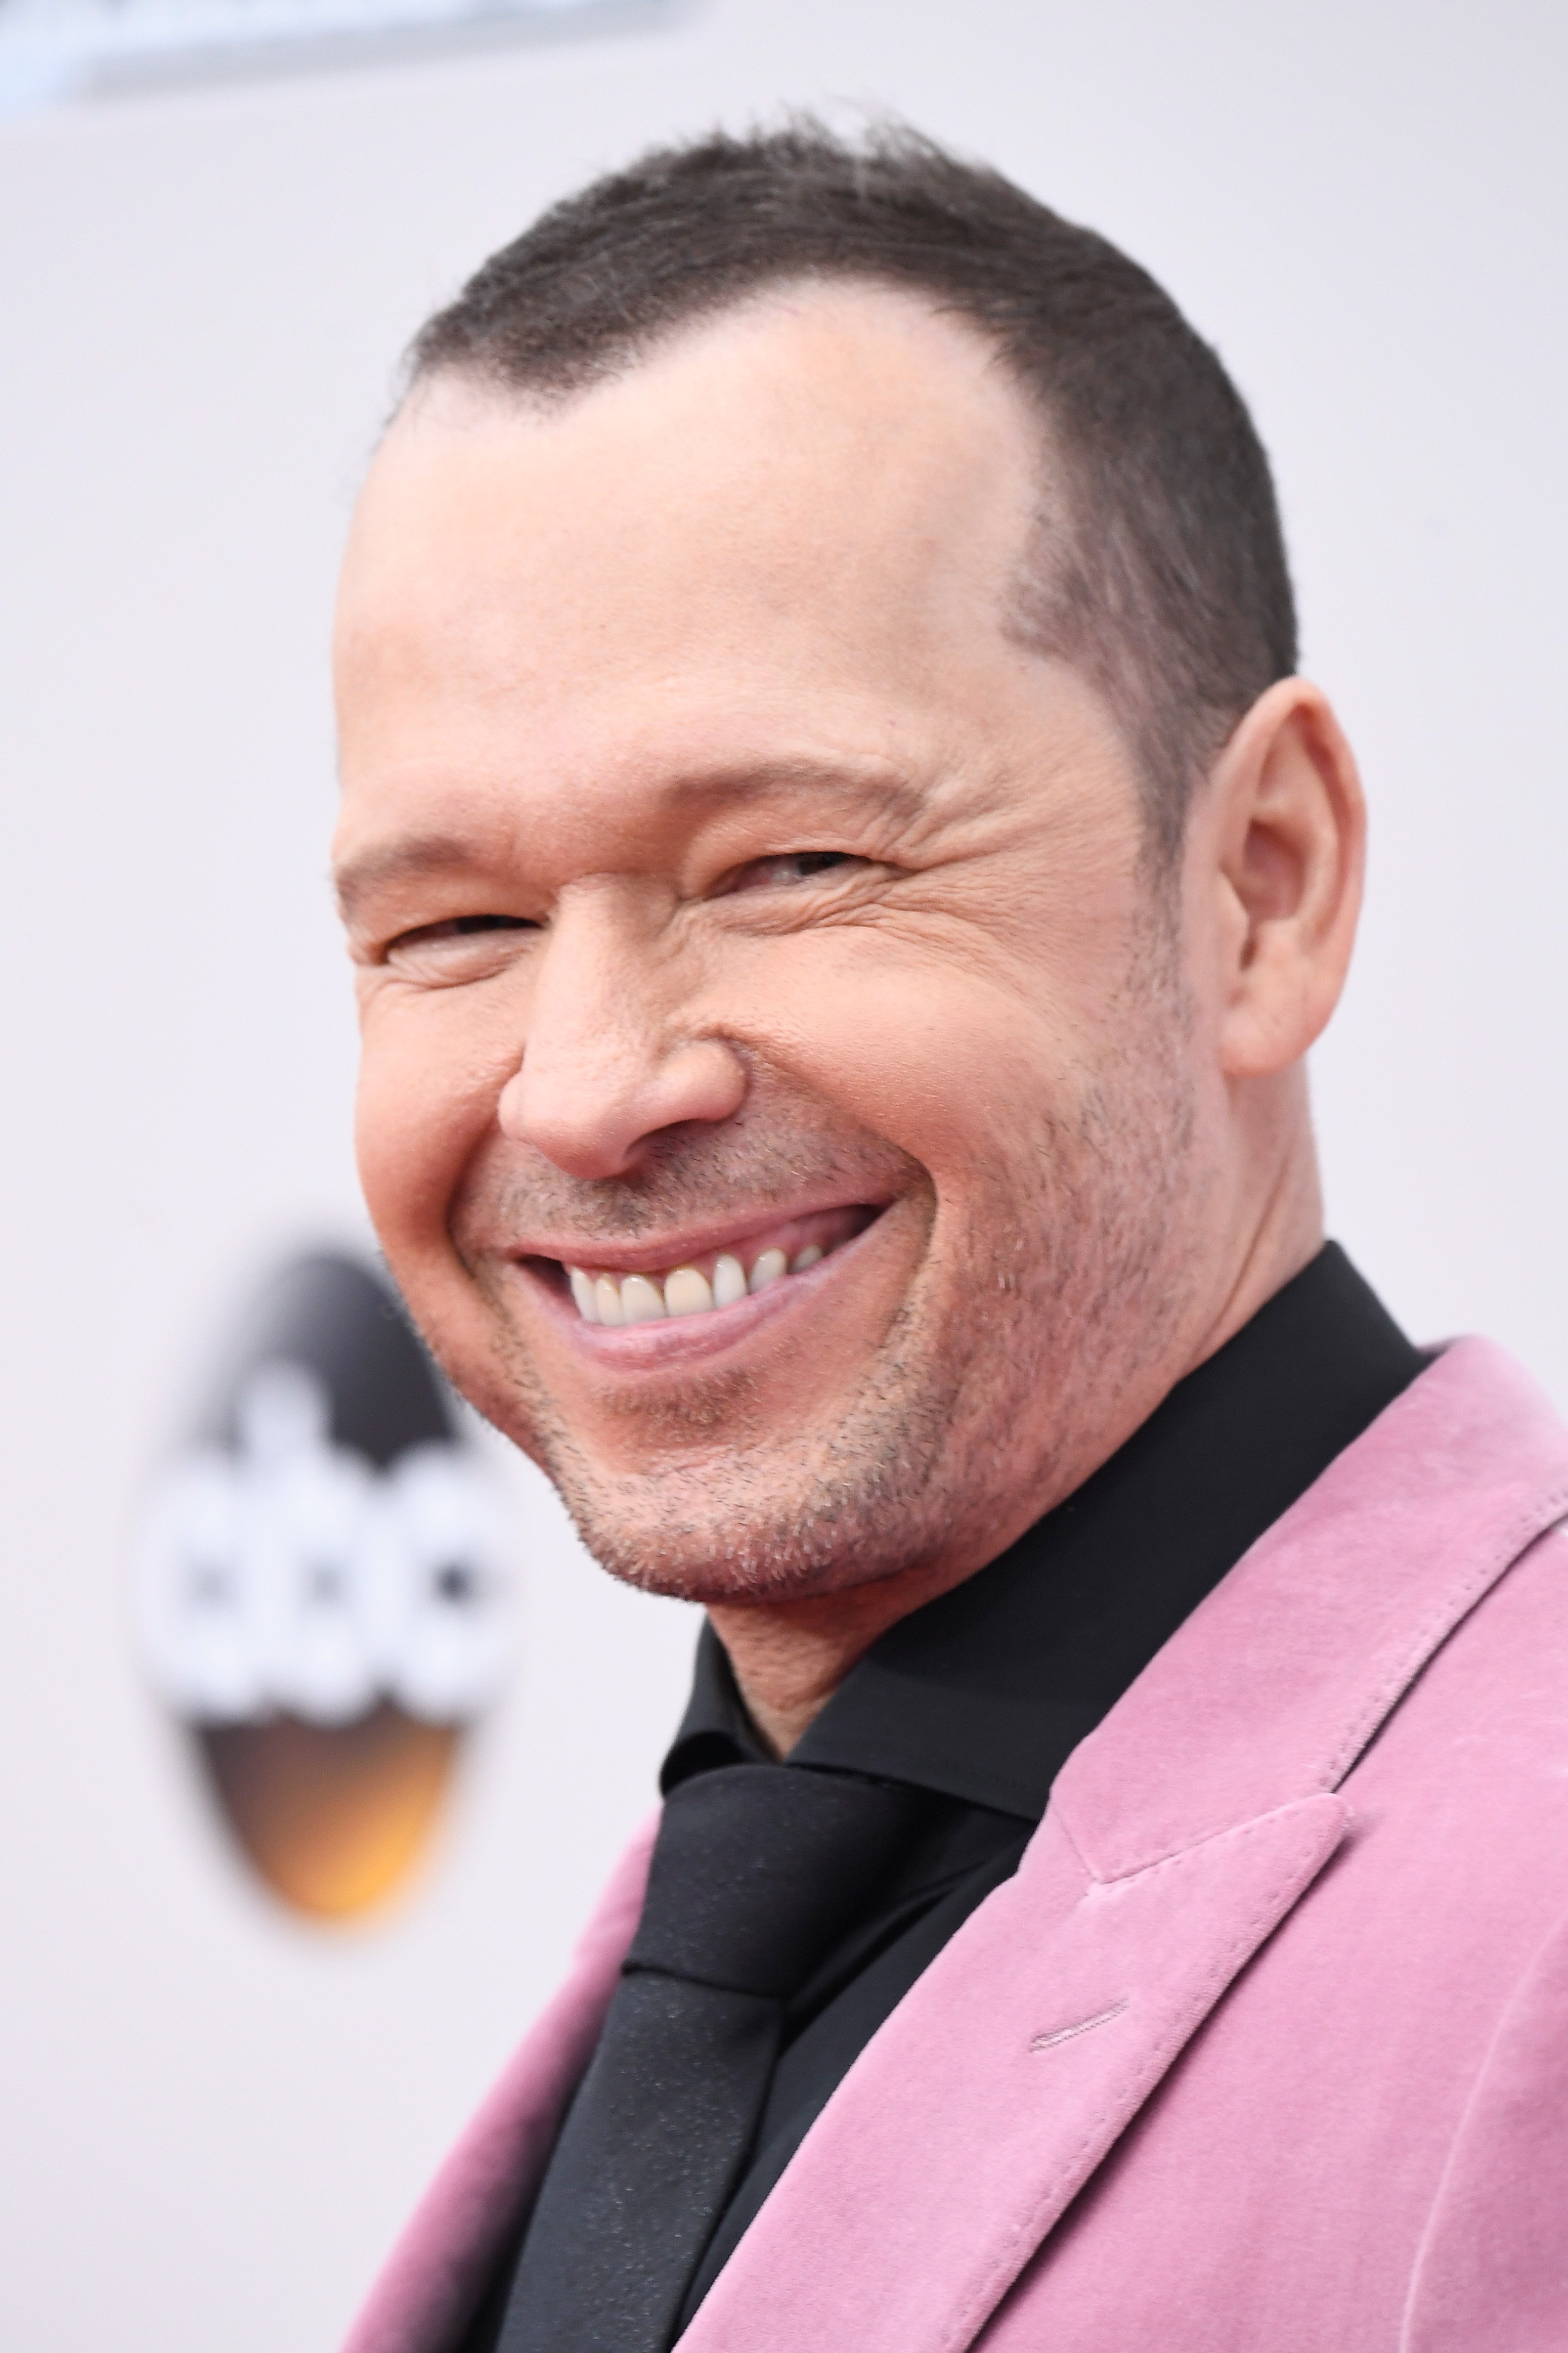 Donnie Wahlberg attend the 2016 American Music Awards at Microsoft Theater on November 20, 2016 in Los Angeles, California | Source: Getty Images 